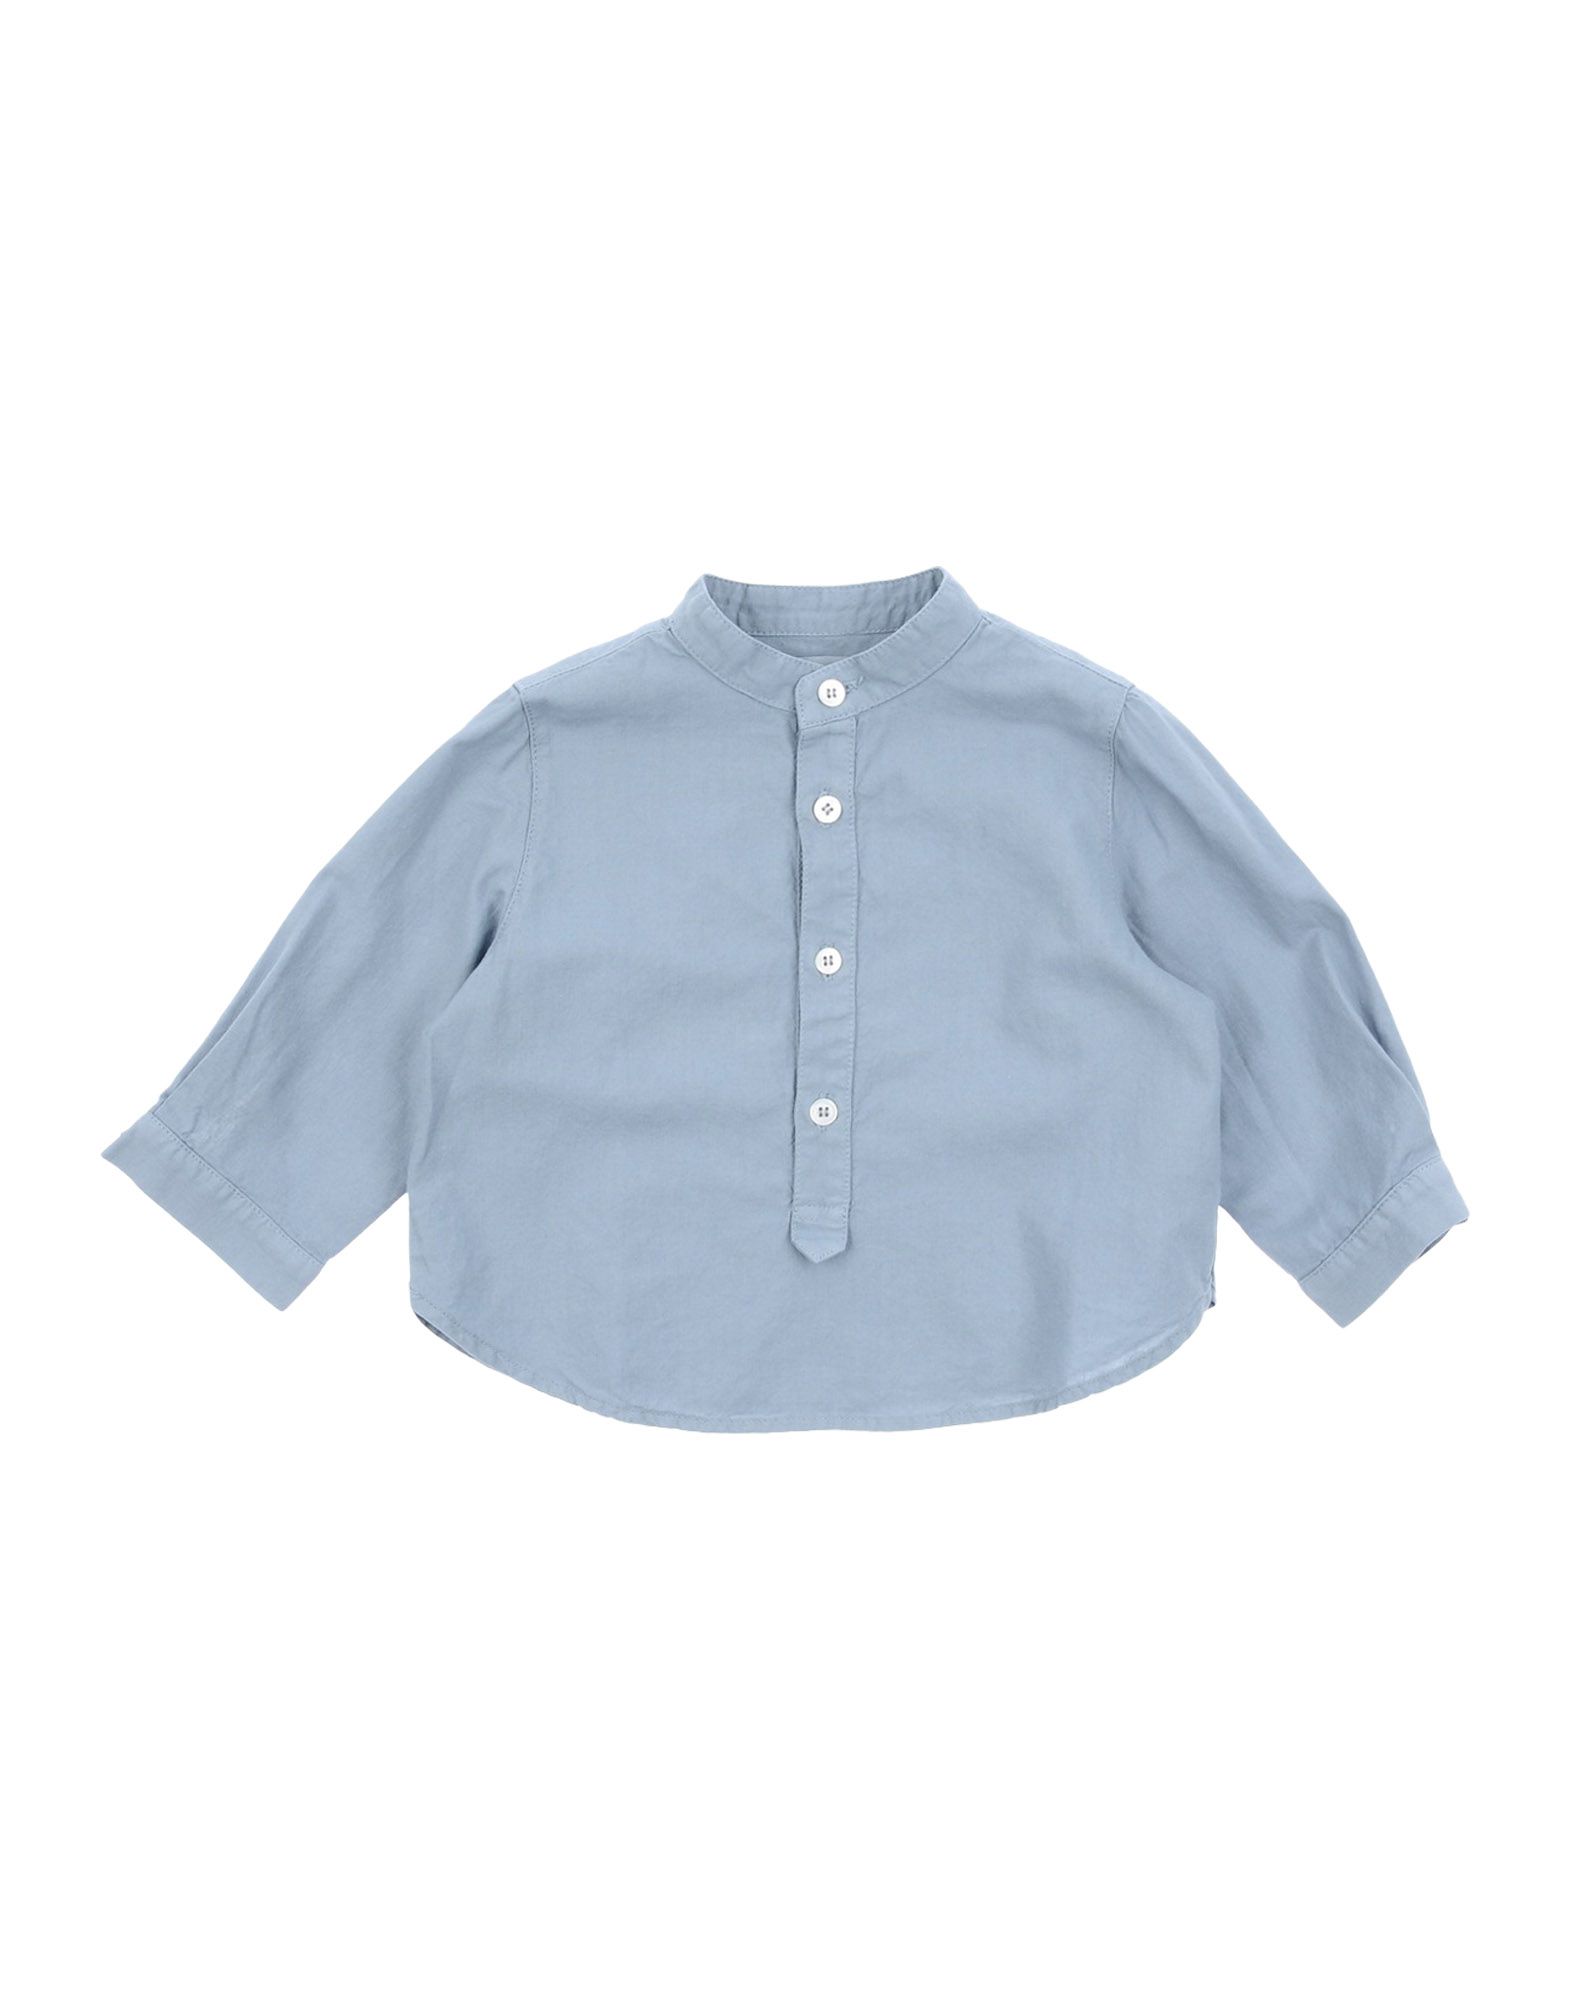 BABE & TESS Solid color shirt